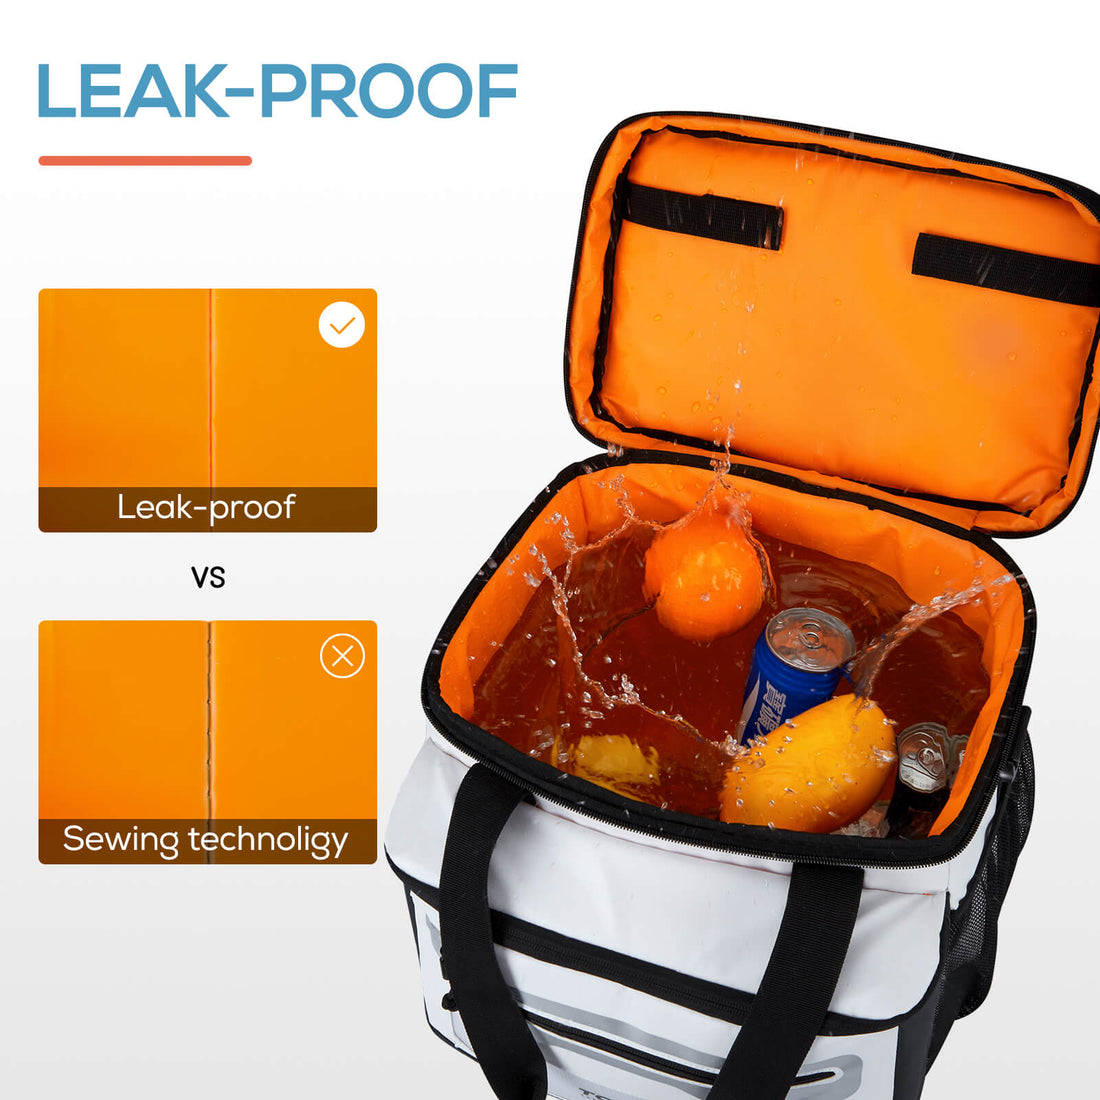 Large Collapsible Cooler Bag